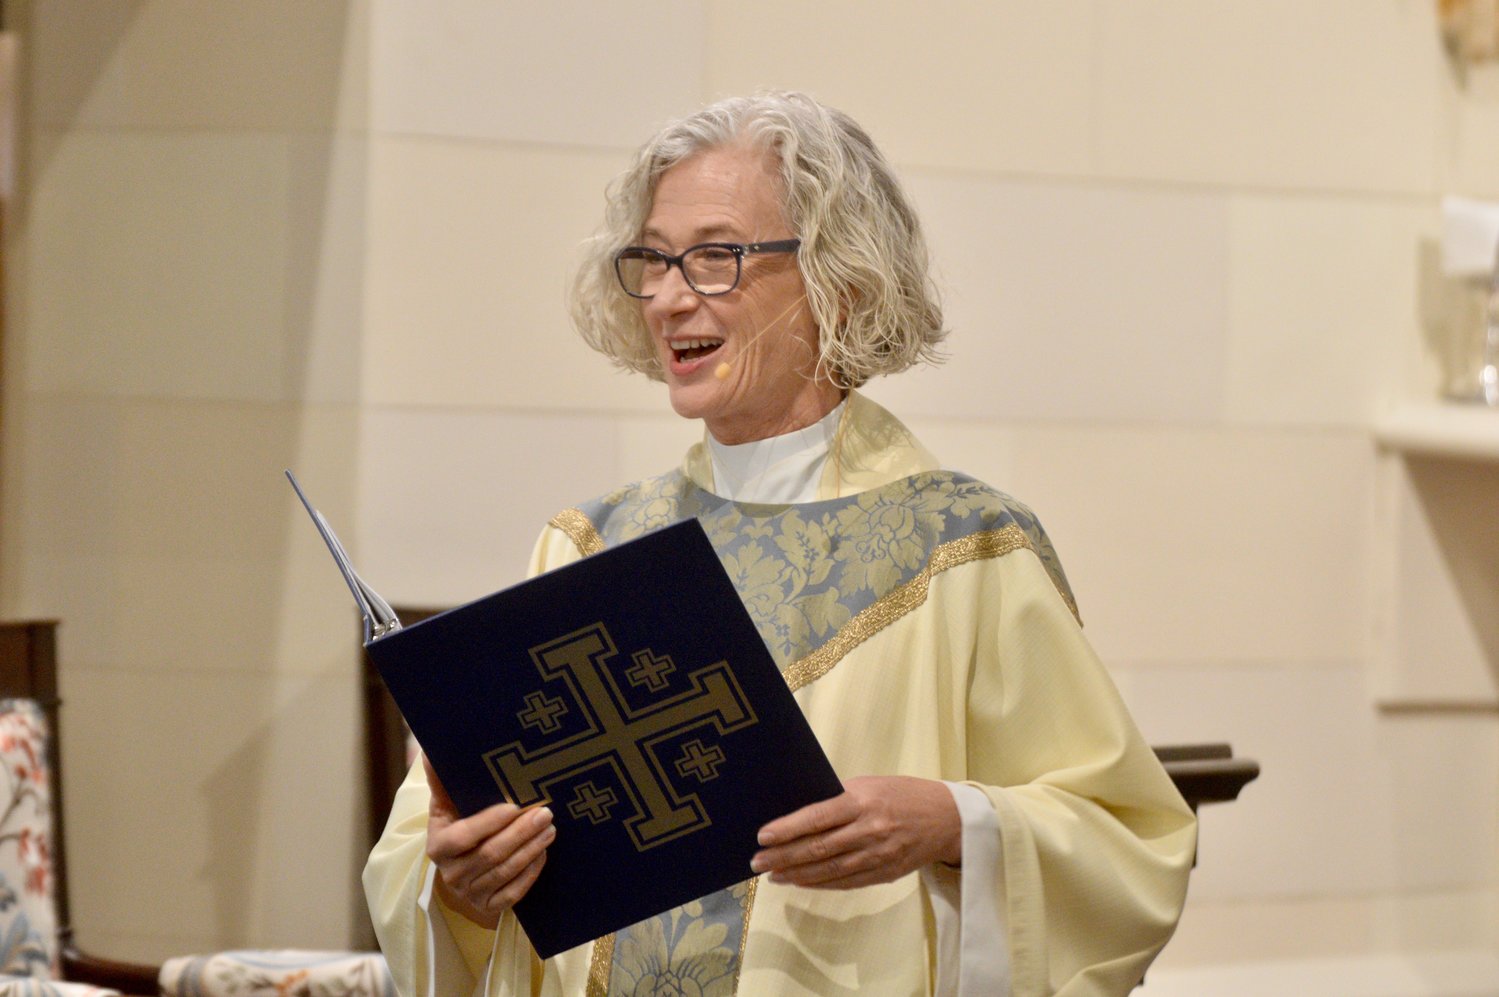 The Rev. Jennifer Pedrick, rector of St. Mary’s Episcopal Church, welcomes a full house of parishioners to the Nov. 13 morning service. “This beautiful house of prayer is a place to nourish and strengthen the living stone,” she said.